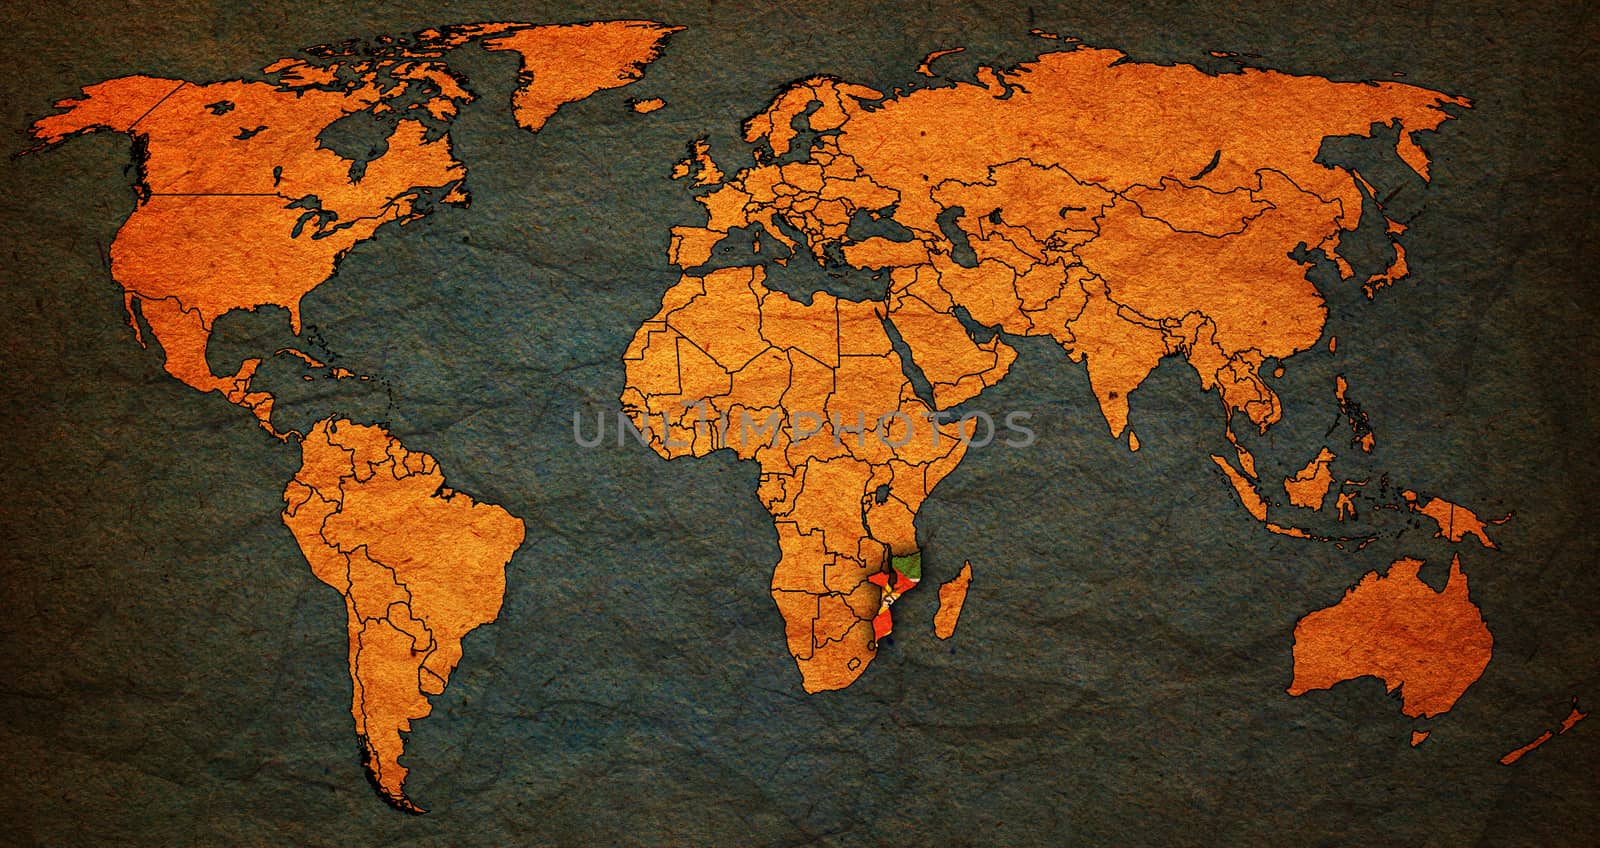 Mozambique territory on world map by michal812